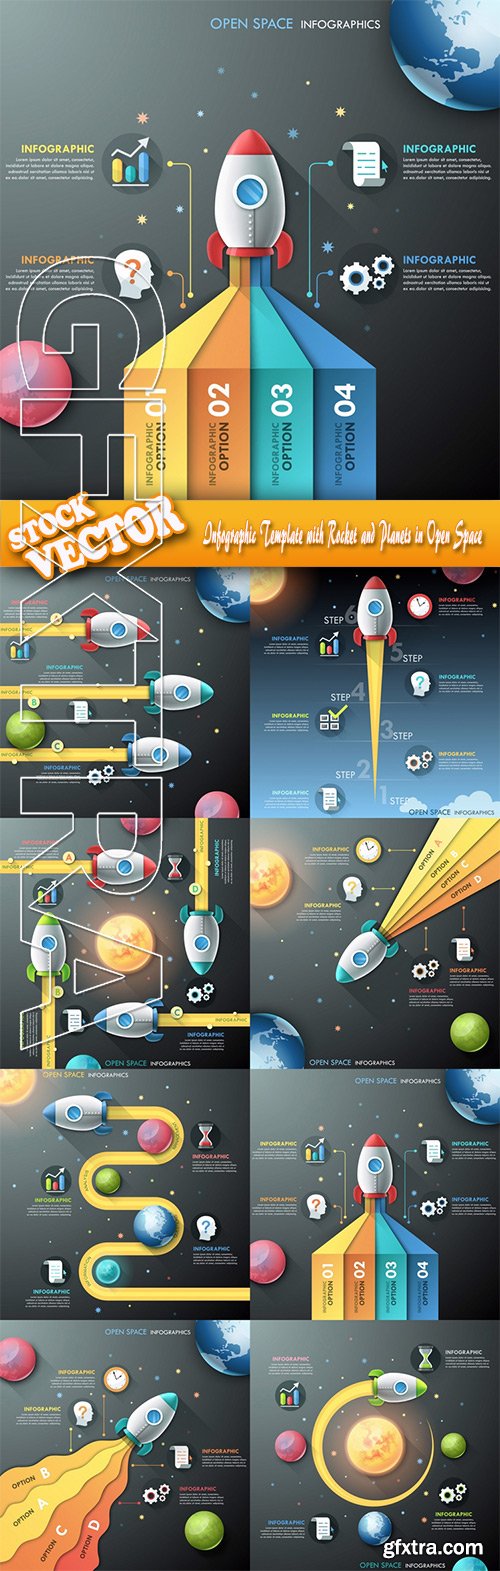 Stock Vector - Infographic Template with Rocket and Planets in Open Space